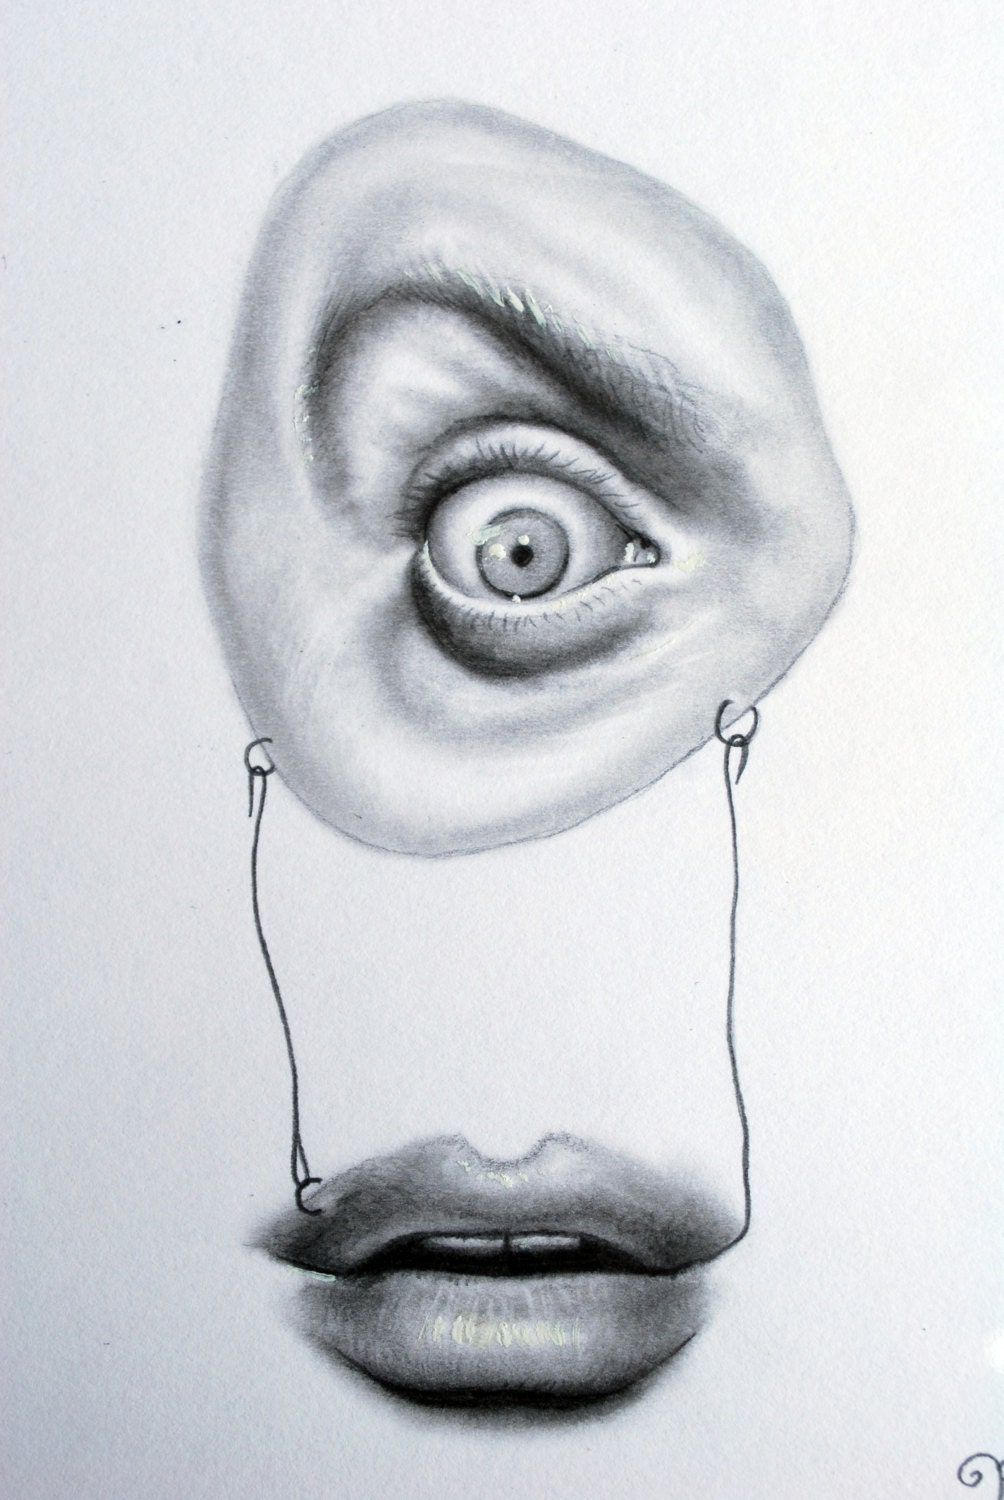 original drawing EyE & MOUTH By Ria small surreal pencil